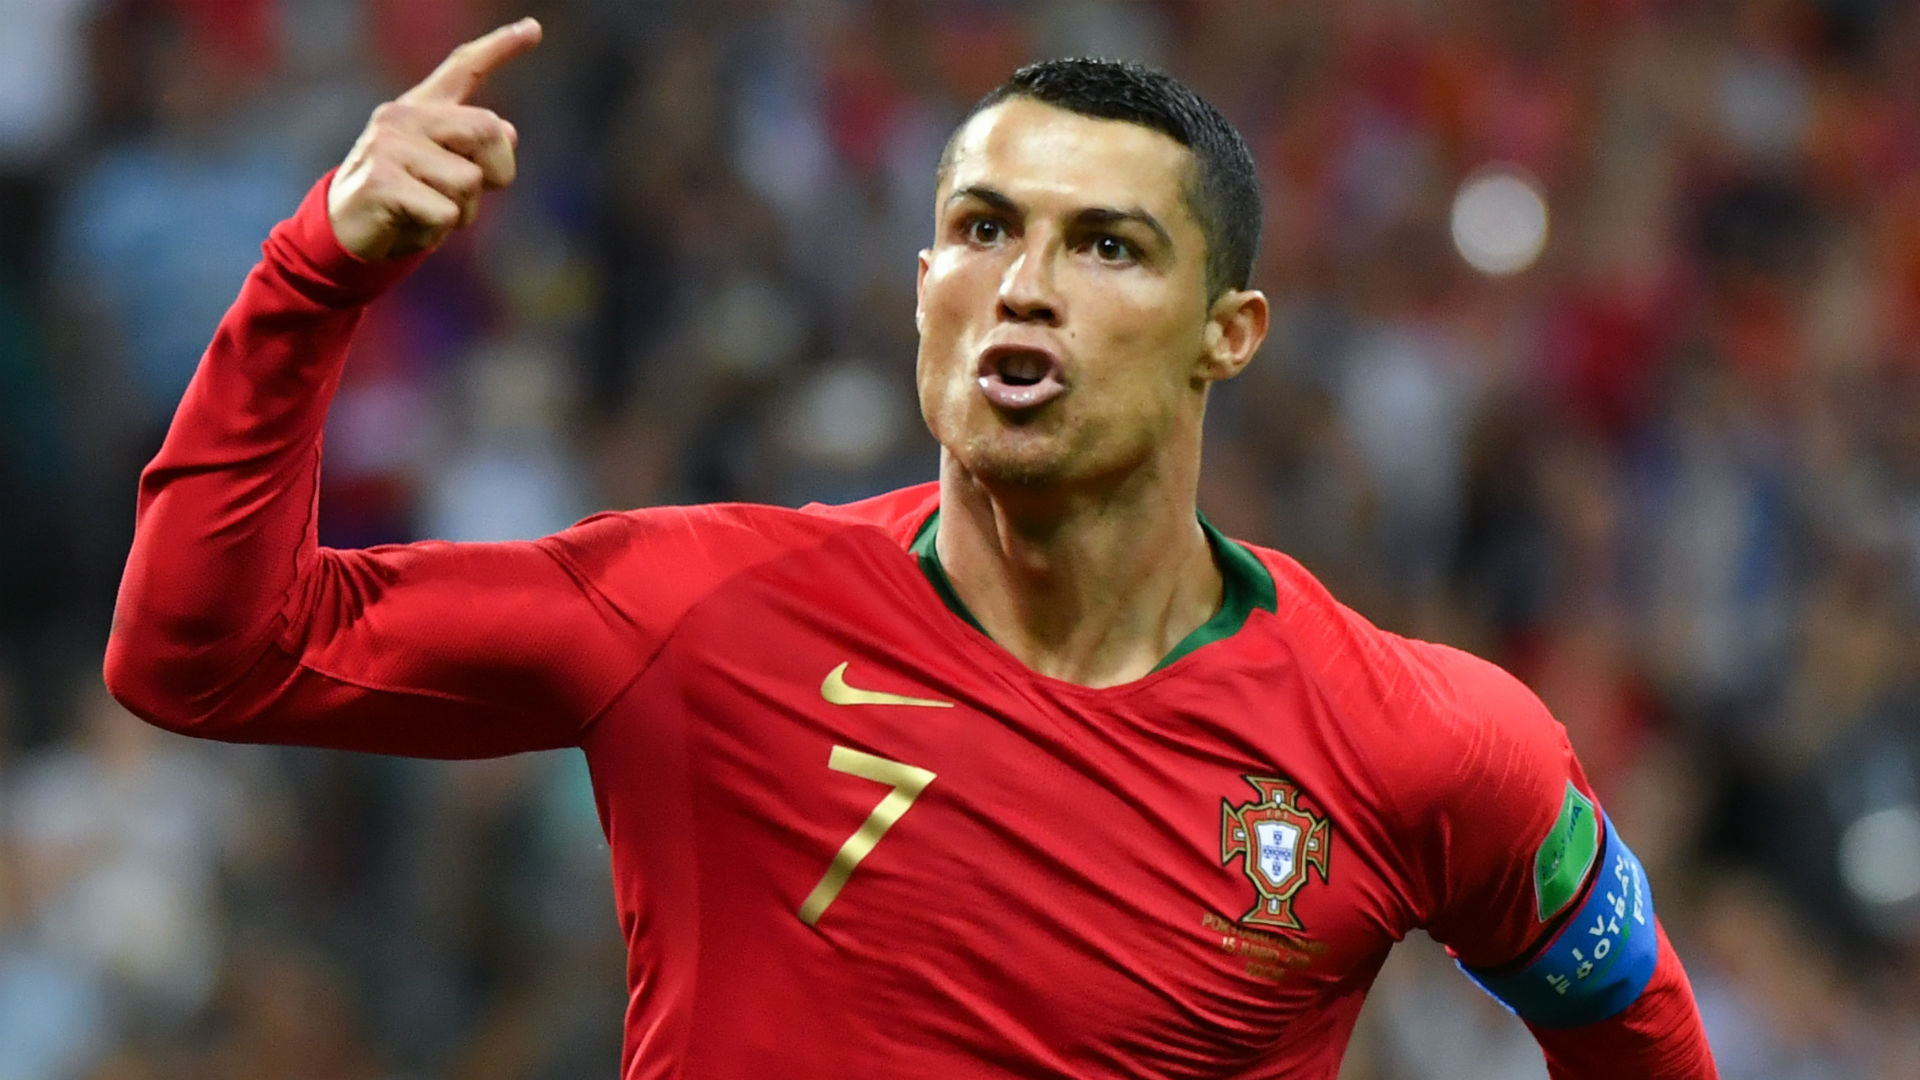 Ronaldo's “fake” goal and Messi's Lewandowski snub: The GOATs know much more is at stake at this World Cup